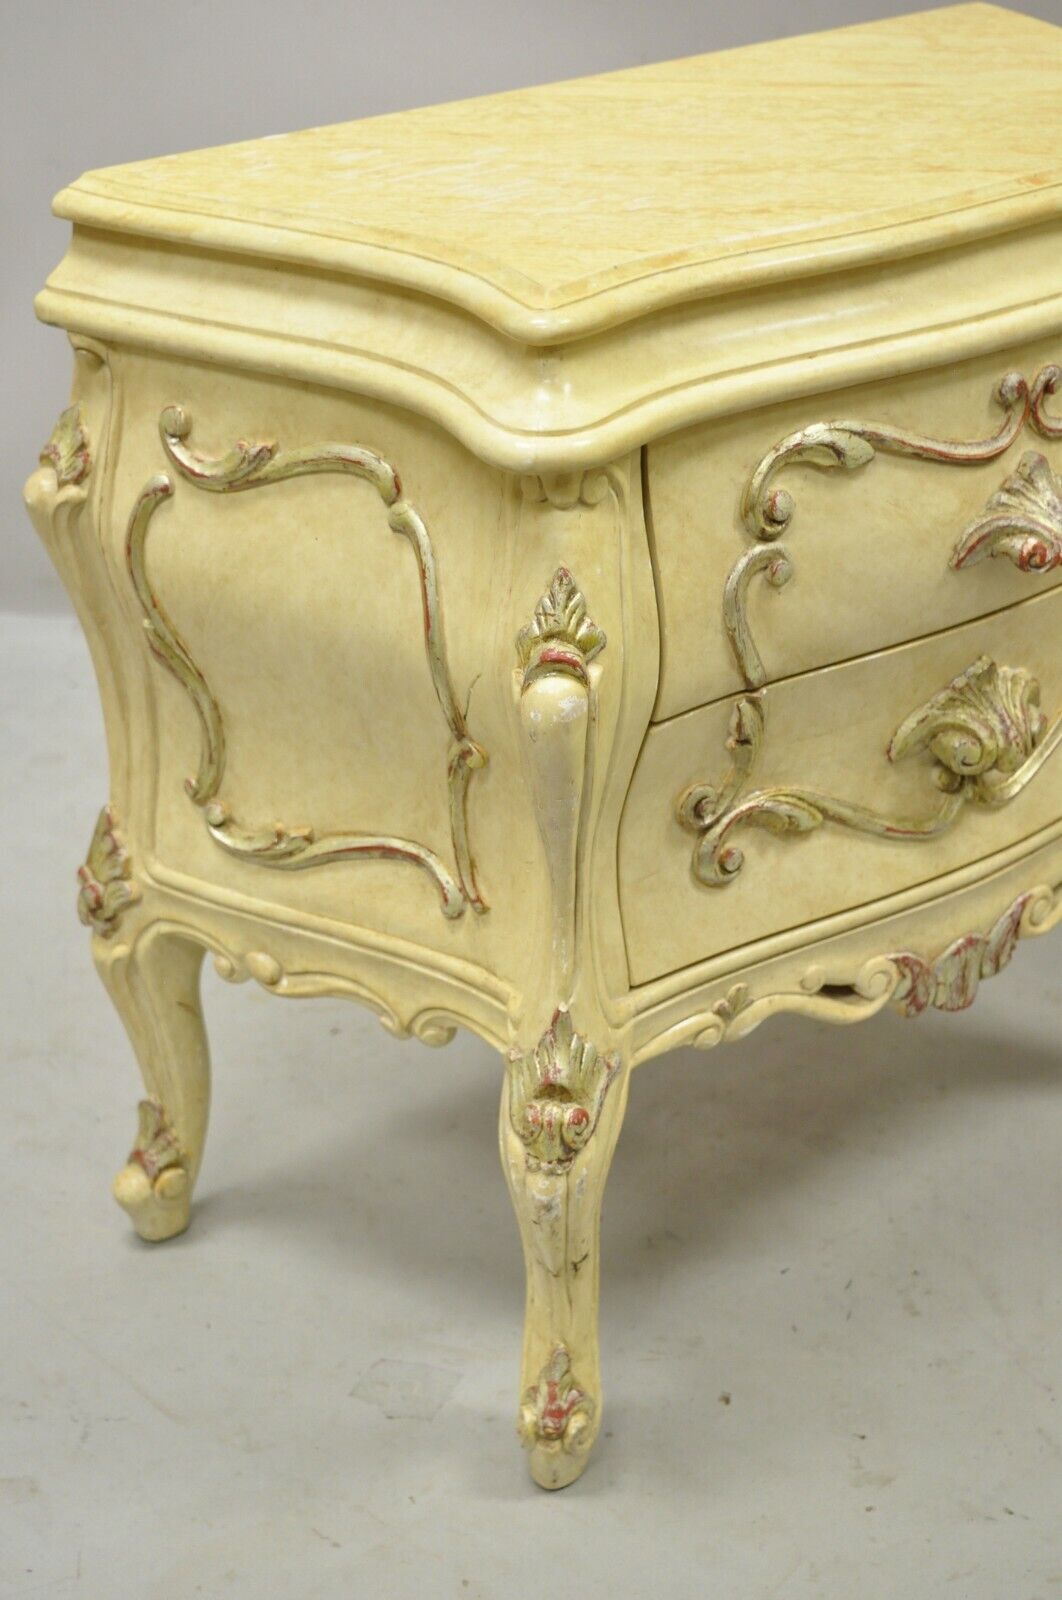 Italian Rococo Cream Lacquer 2 Drawer Nightstands Bombe Bedside Commode - a Pair